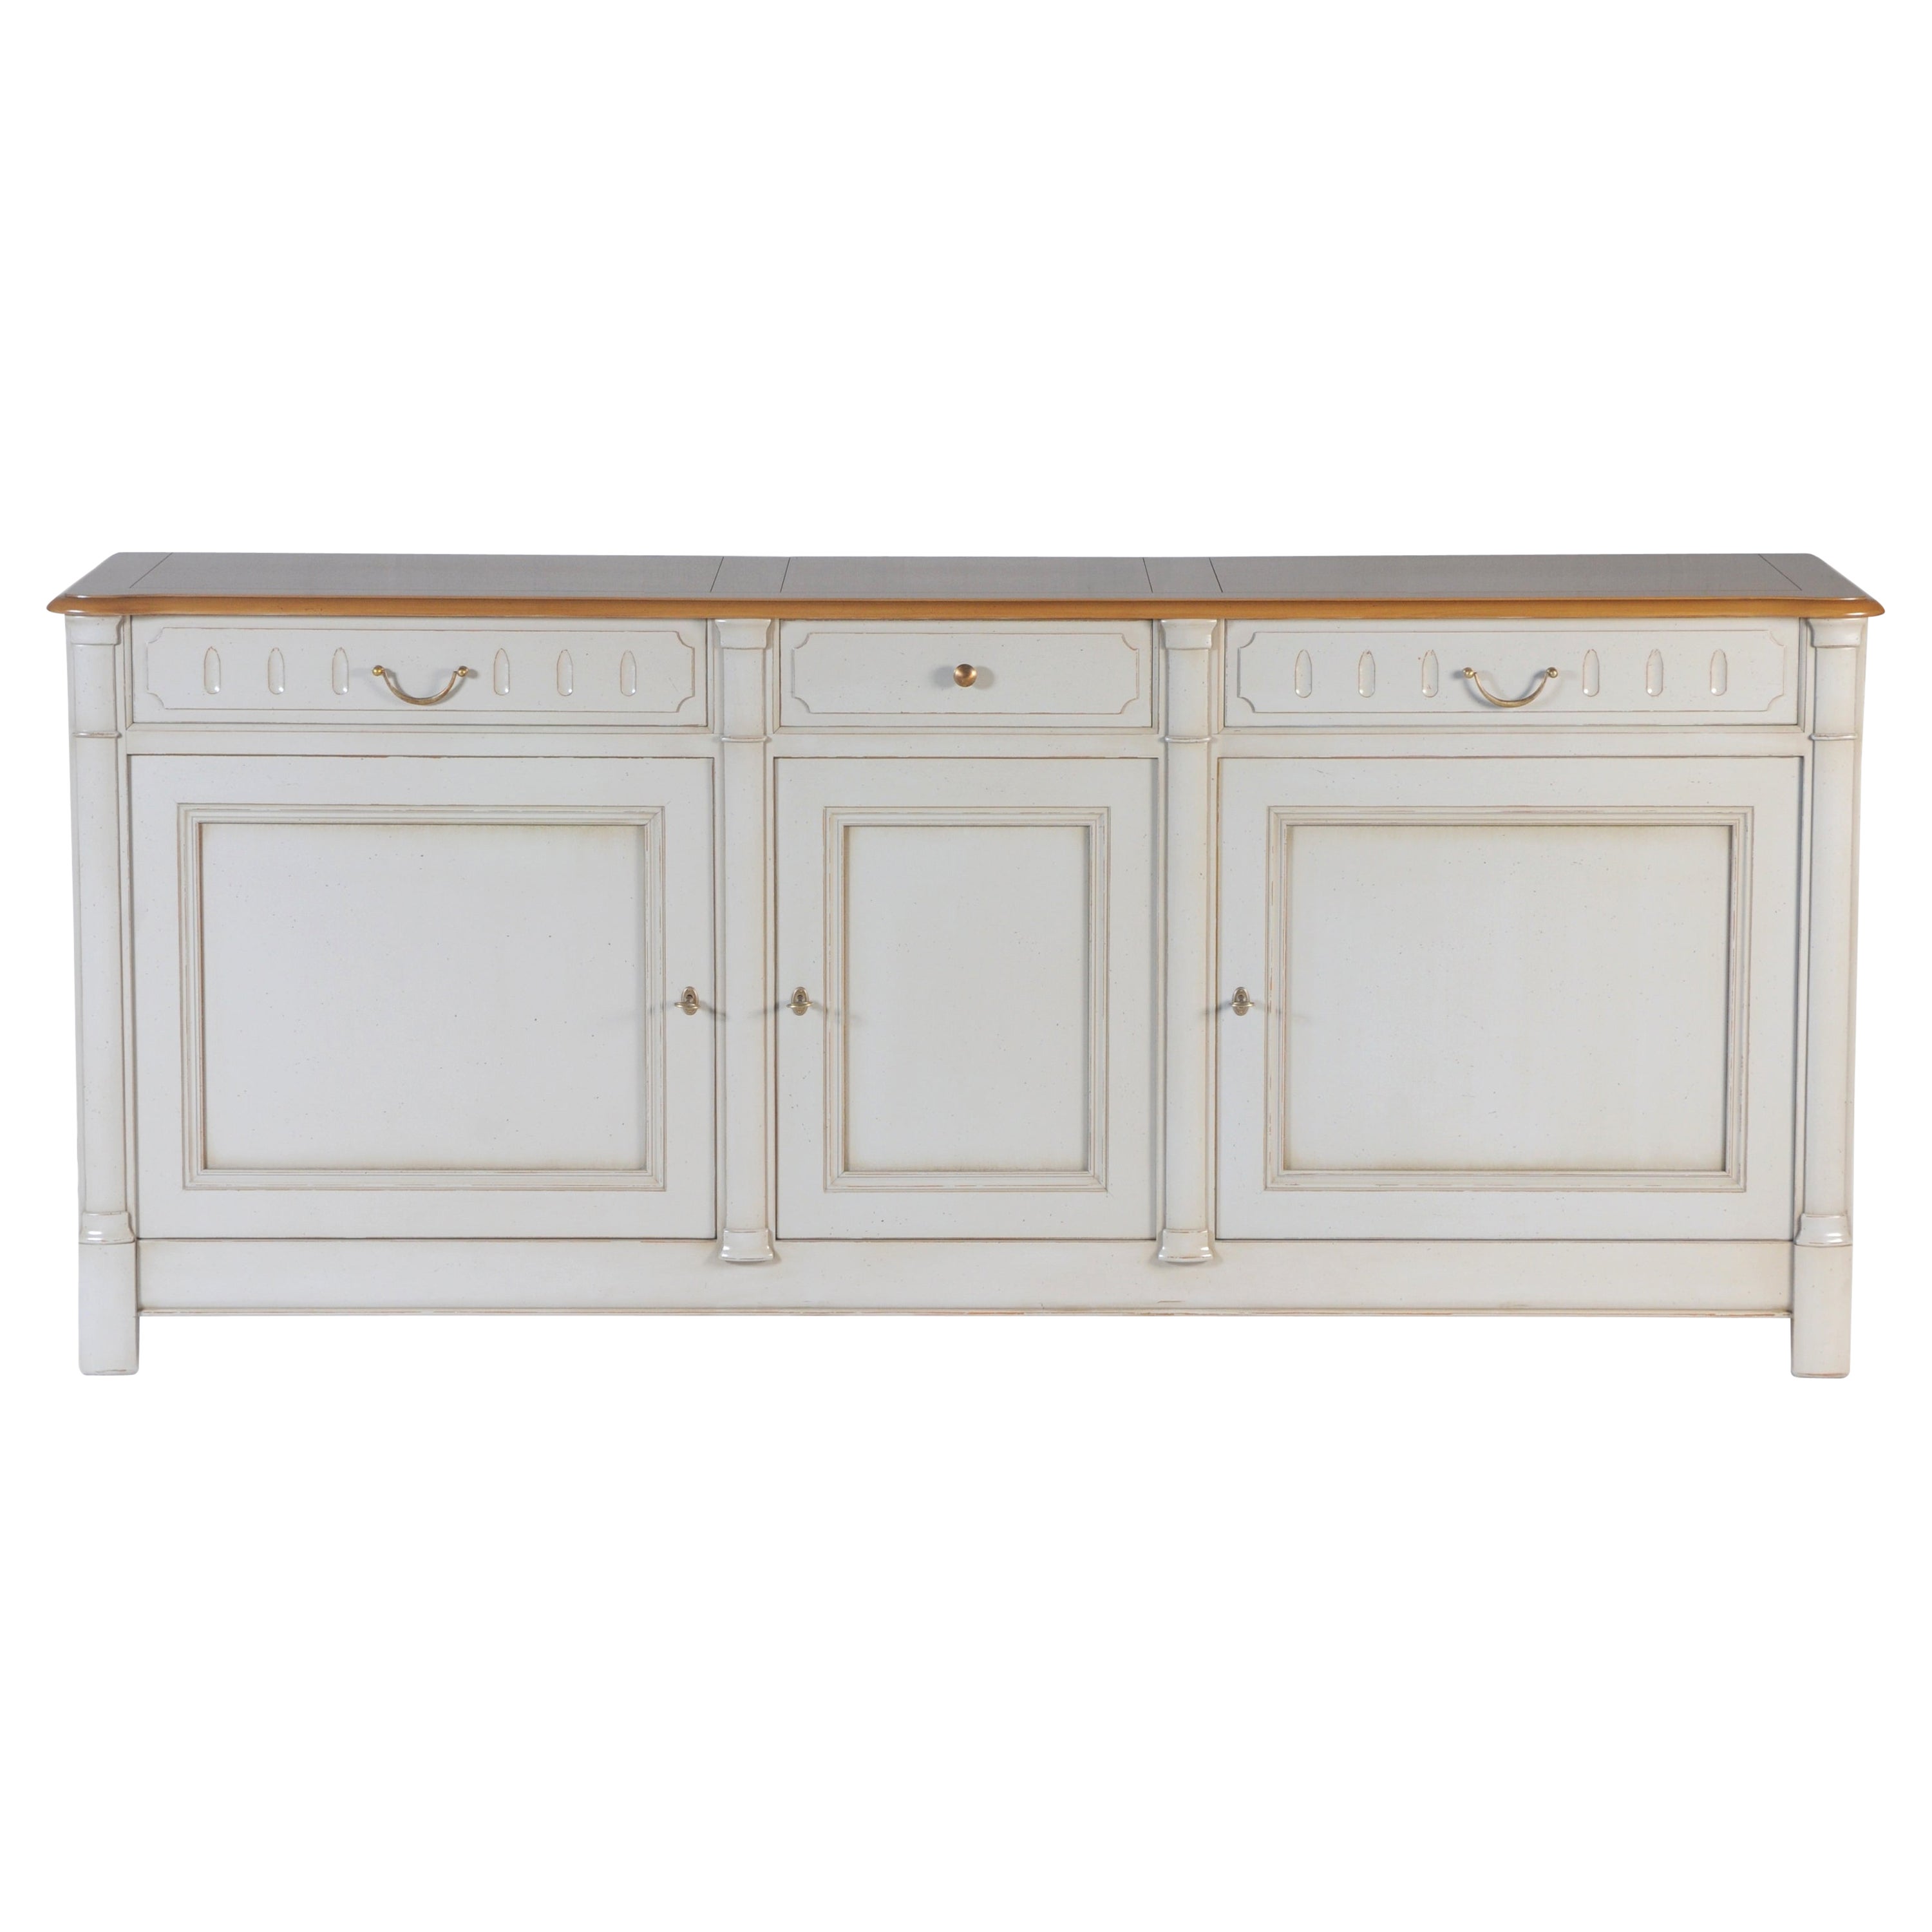 3 Doors Charm French Buffet in Solid Cherry Wood For Sale